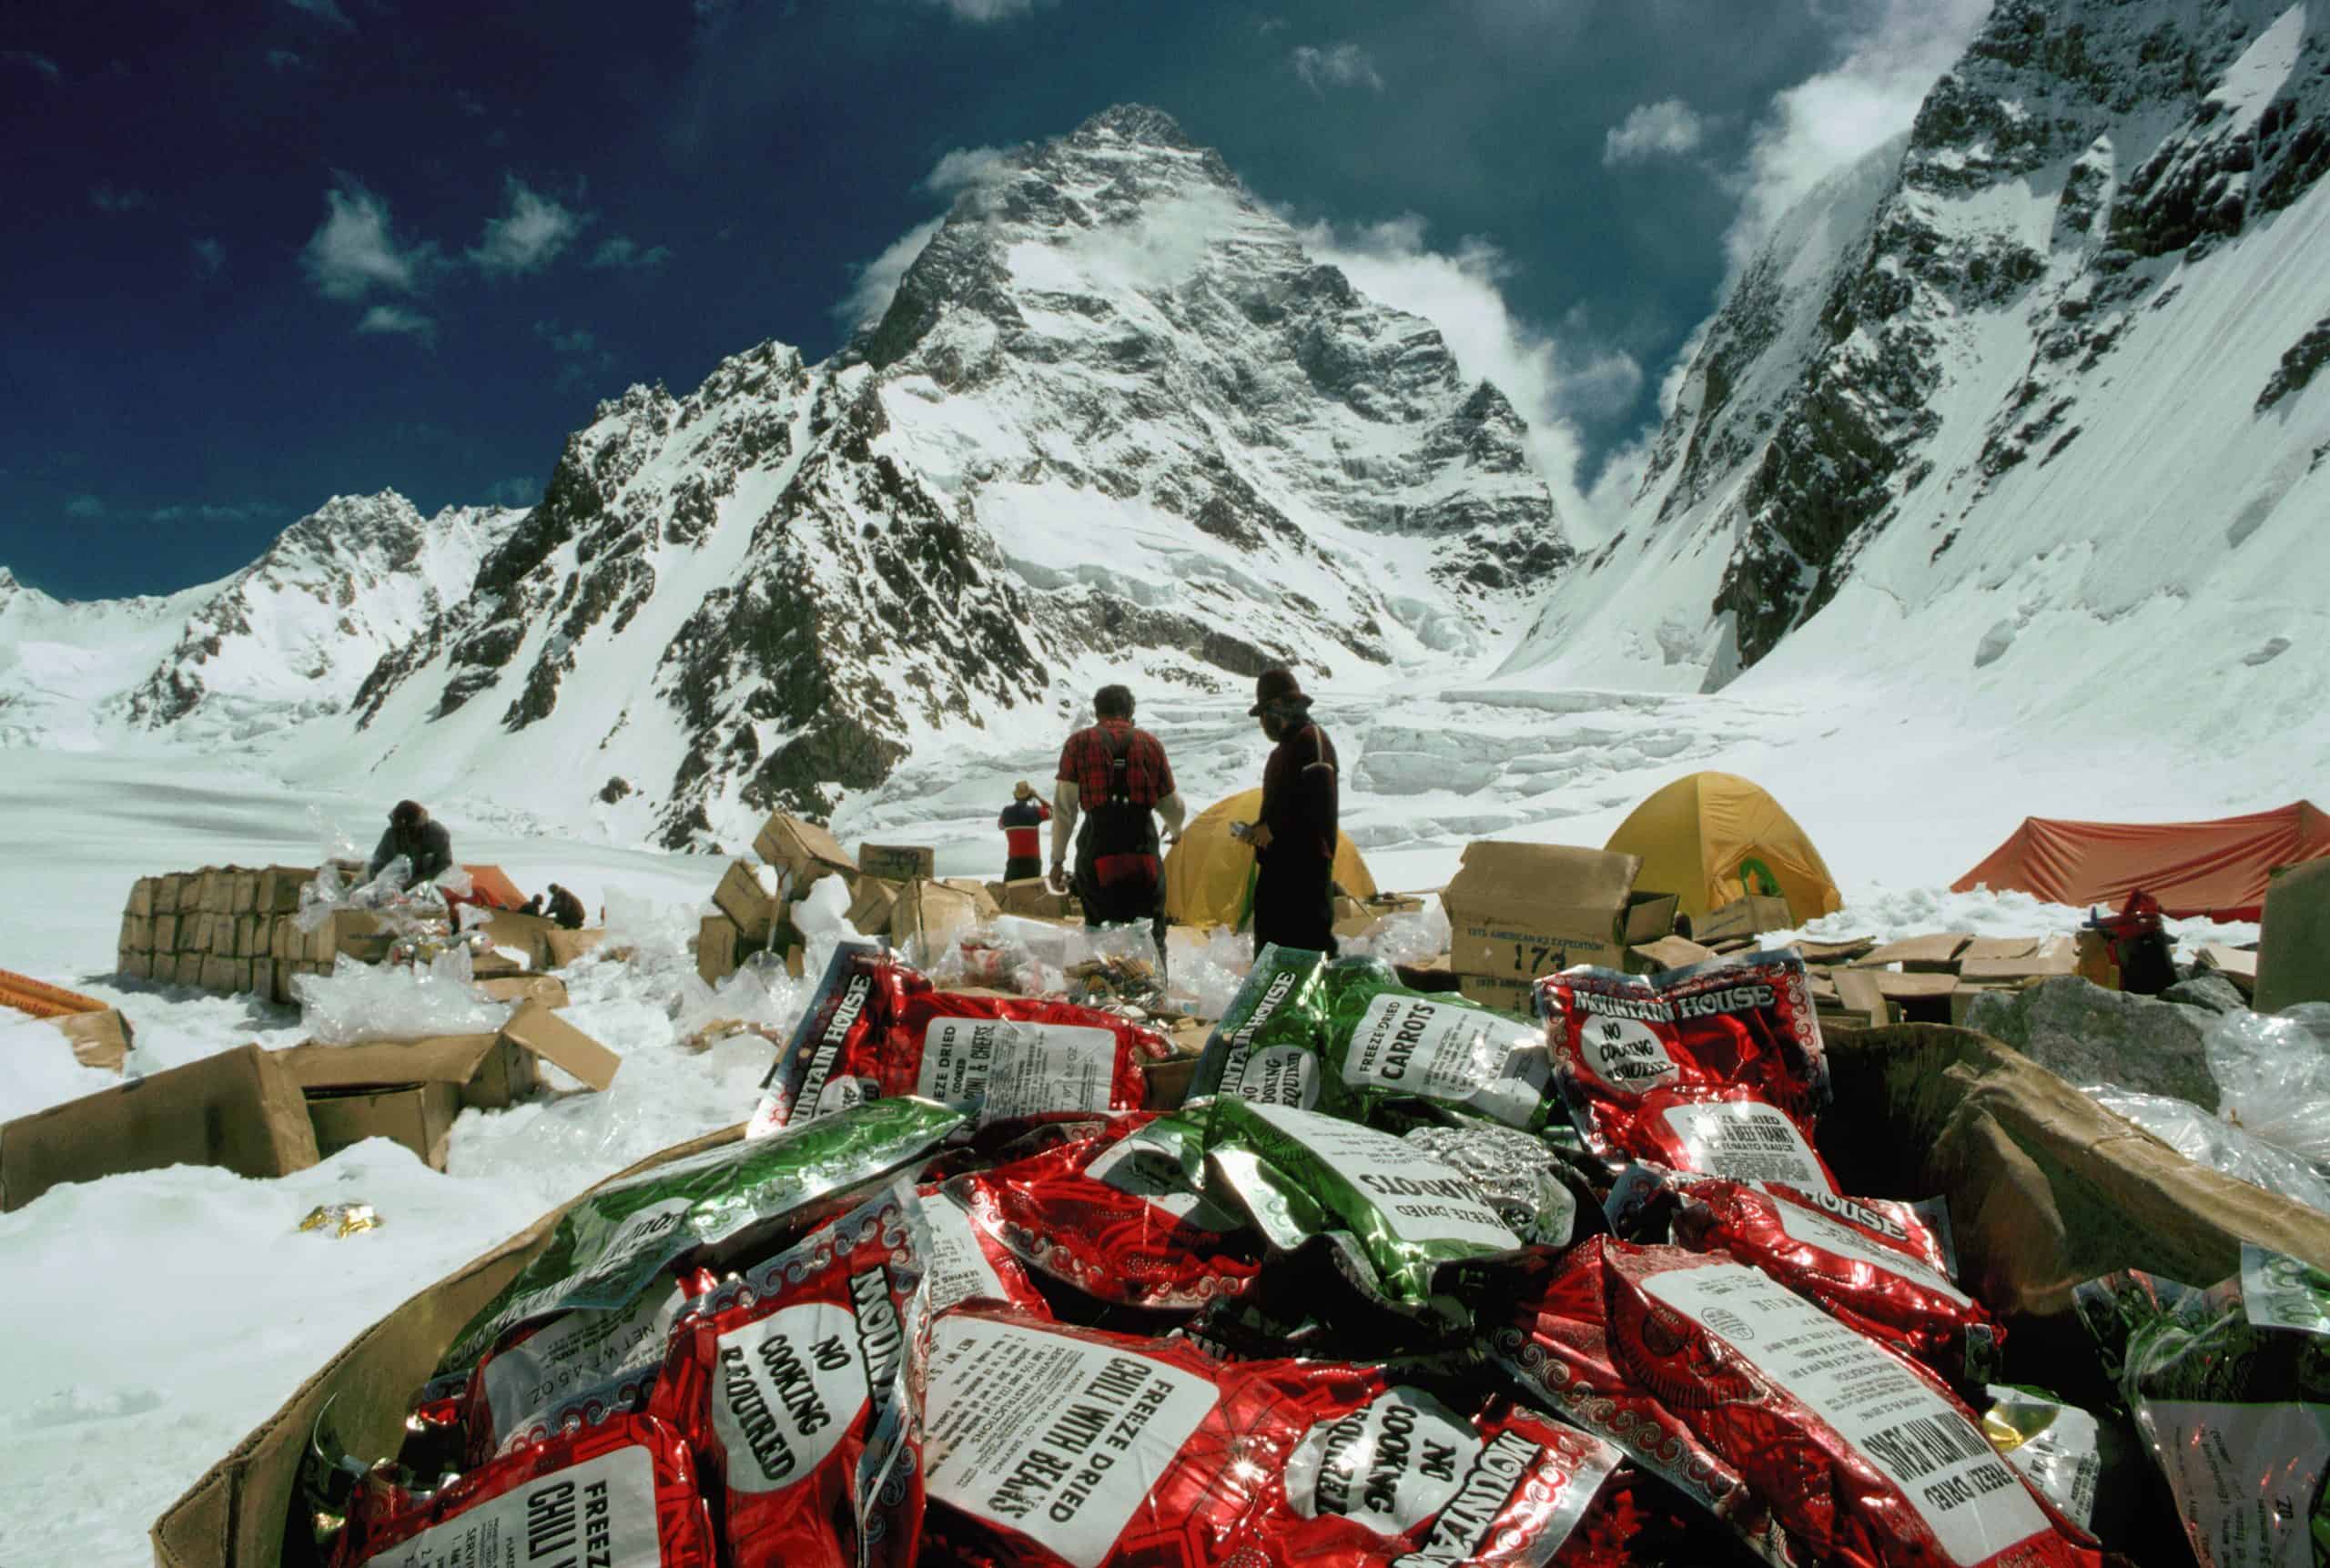 Mountain climbing and nutrition – what do the conquerors of the highest peaks eat?